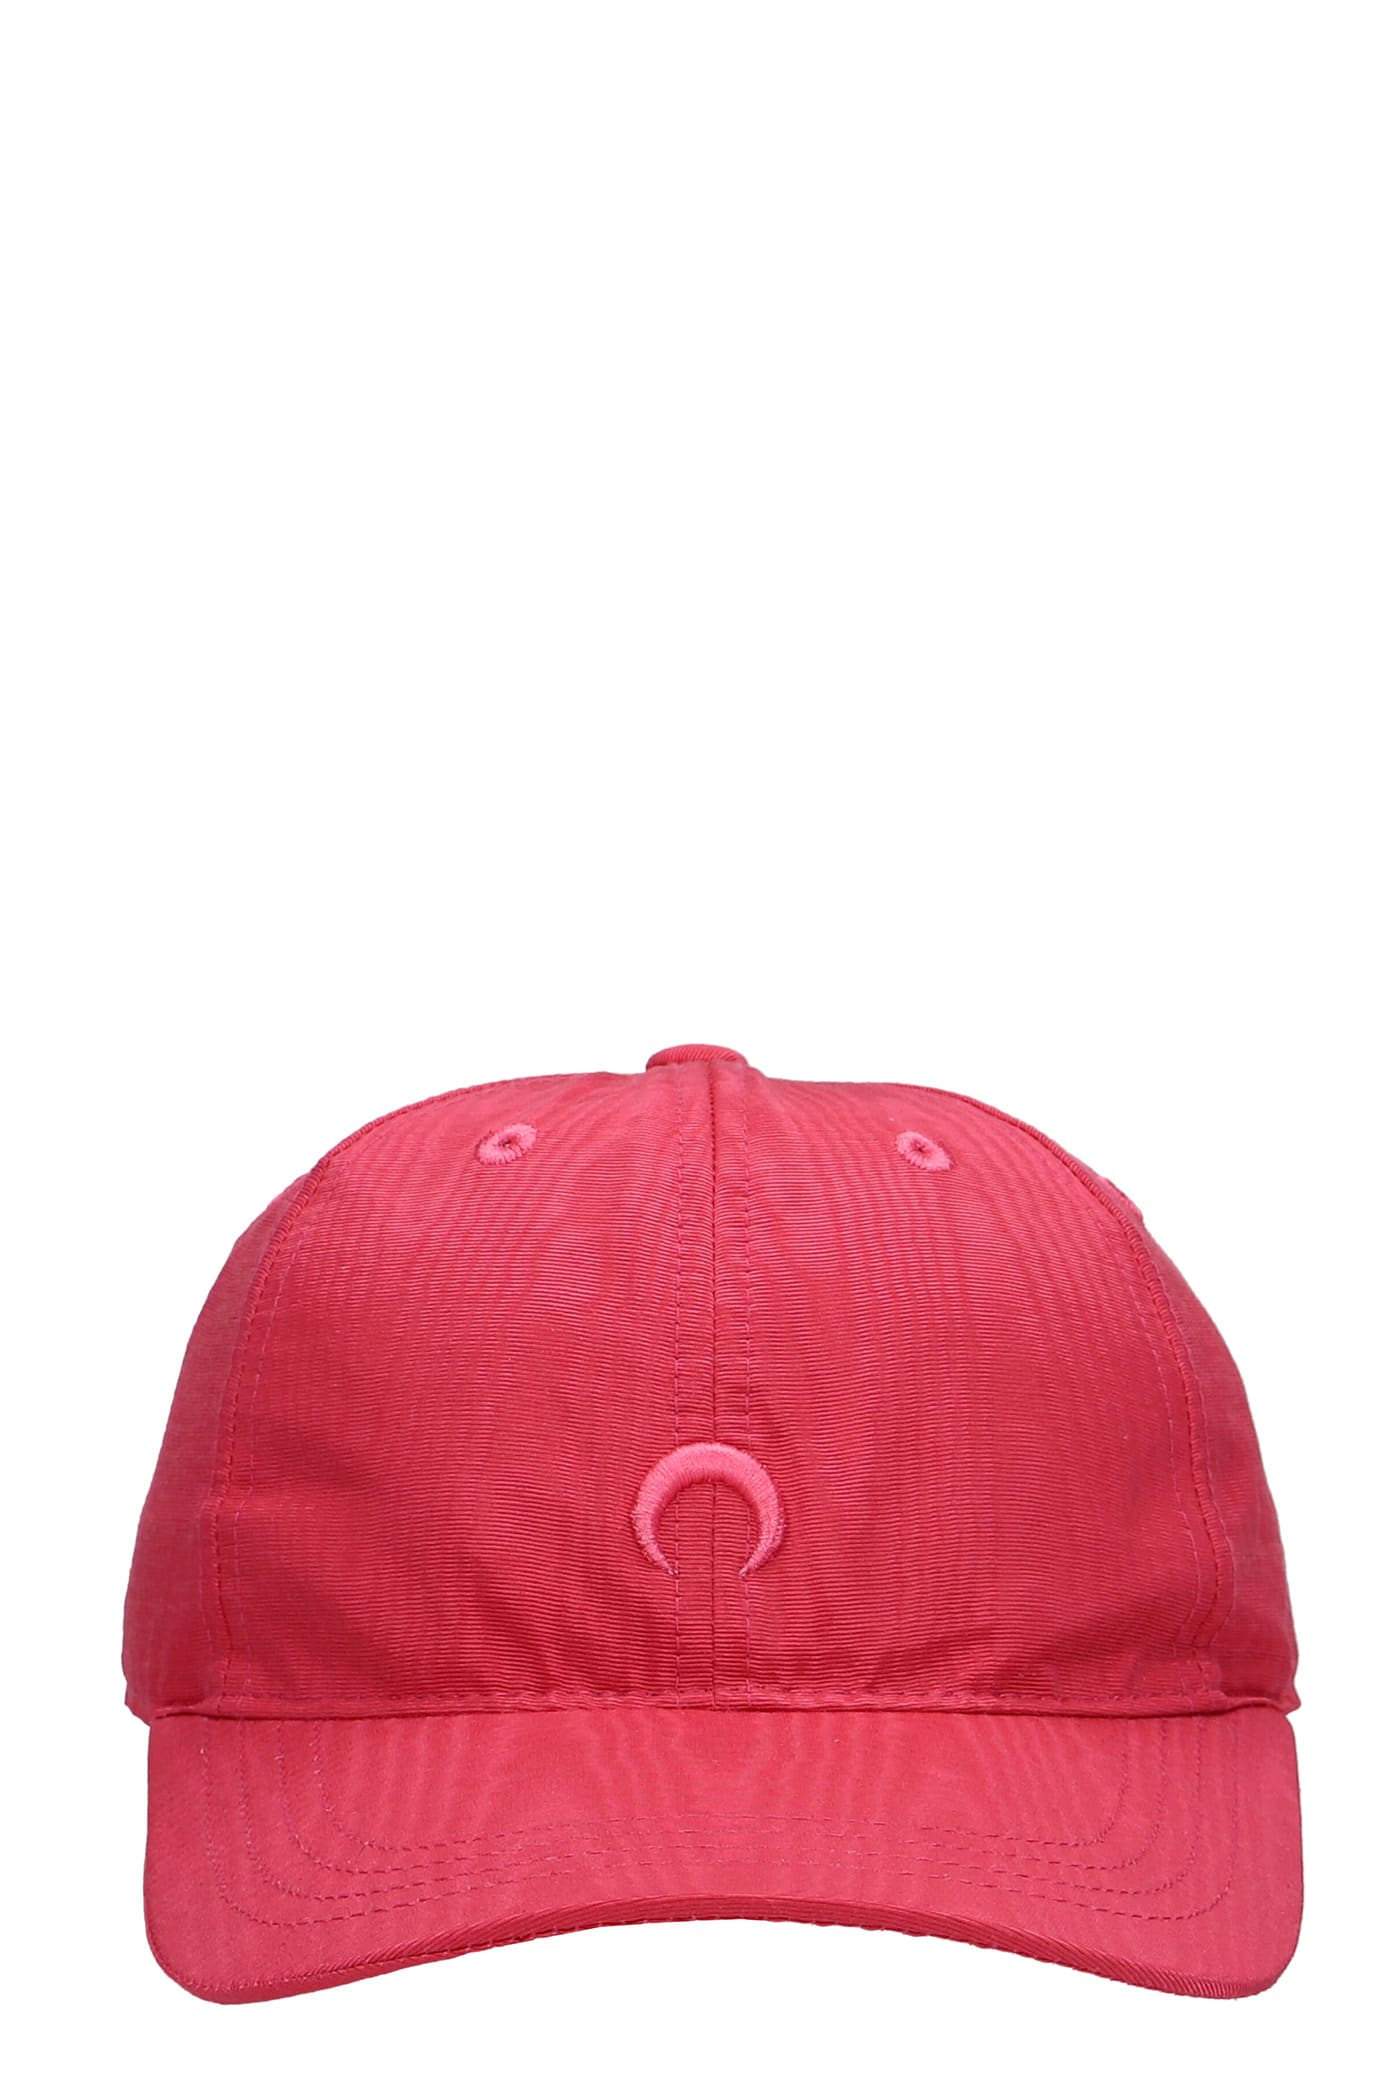 Marine Serre Hats In Fuxia Polyester